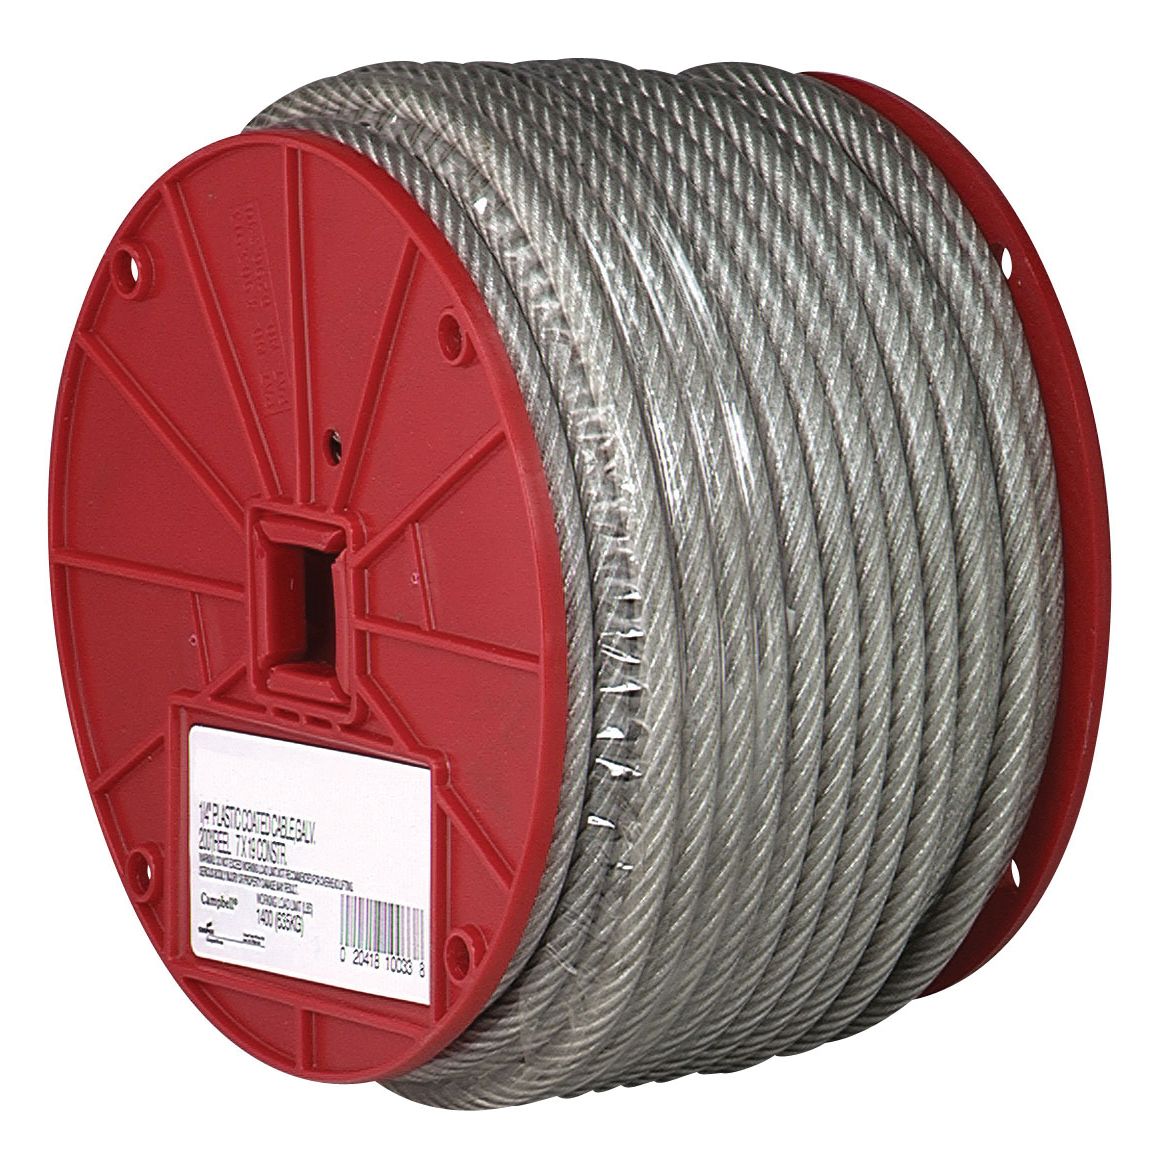 500 500 ft Reel Clear Vinyl Coated Cable: 50 7x7 Construction 1/16 Coated to 3/32 Diameter 100 250 1000 2500 Ft